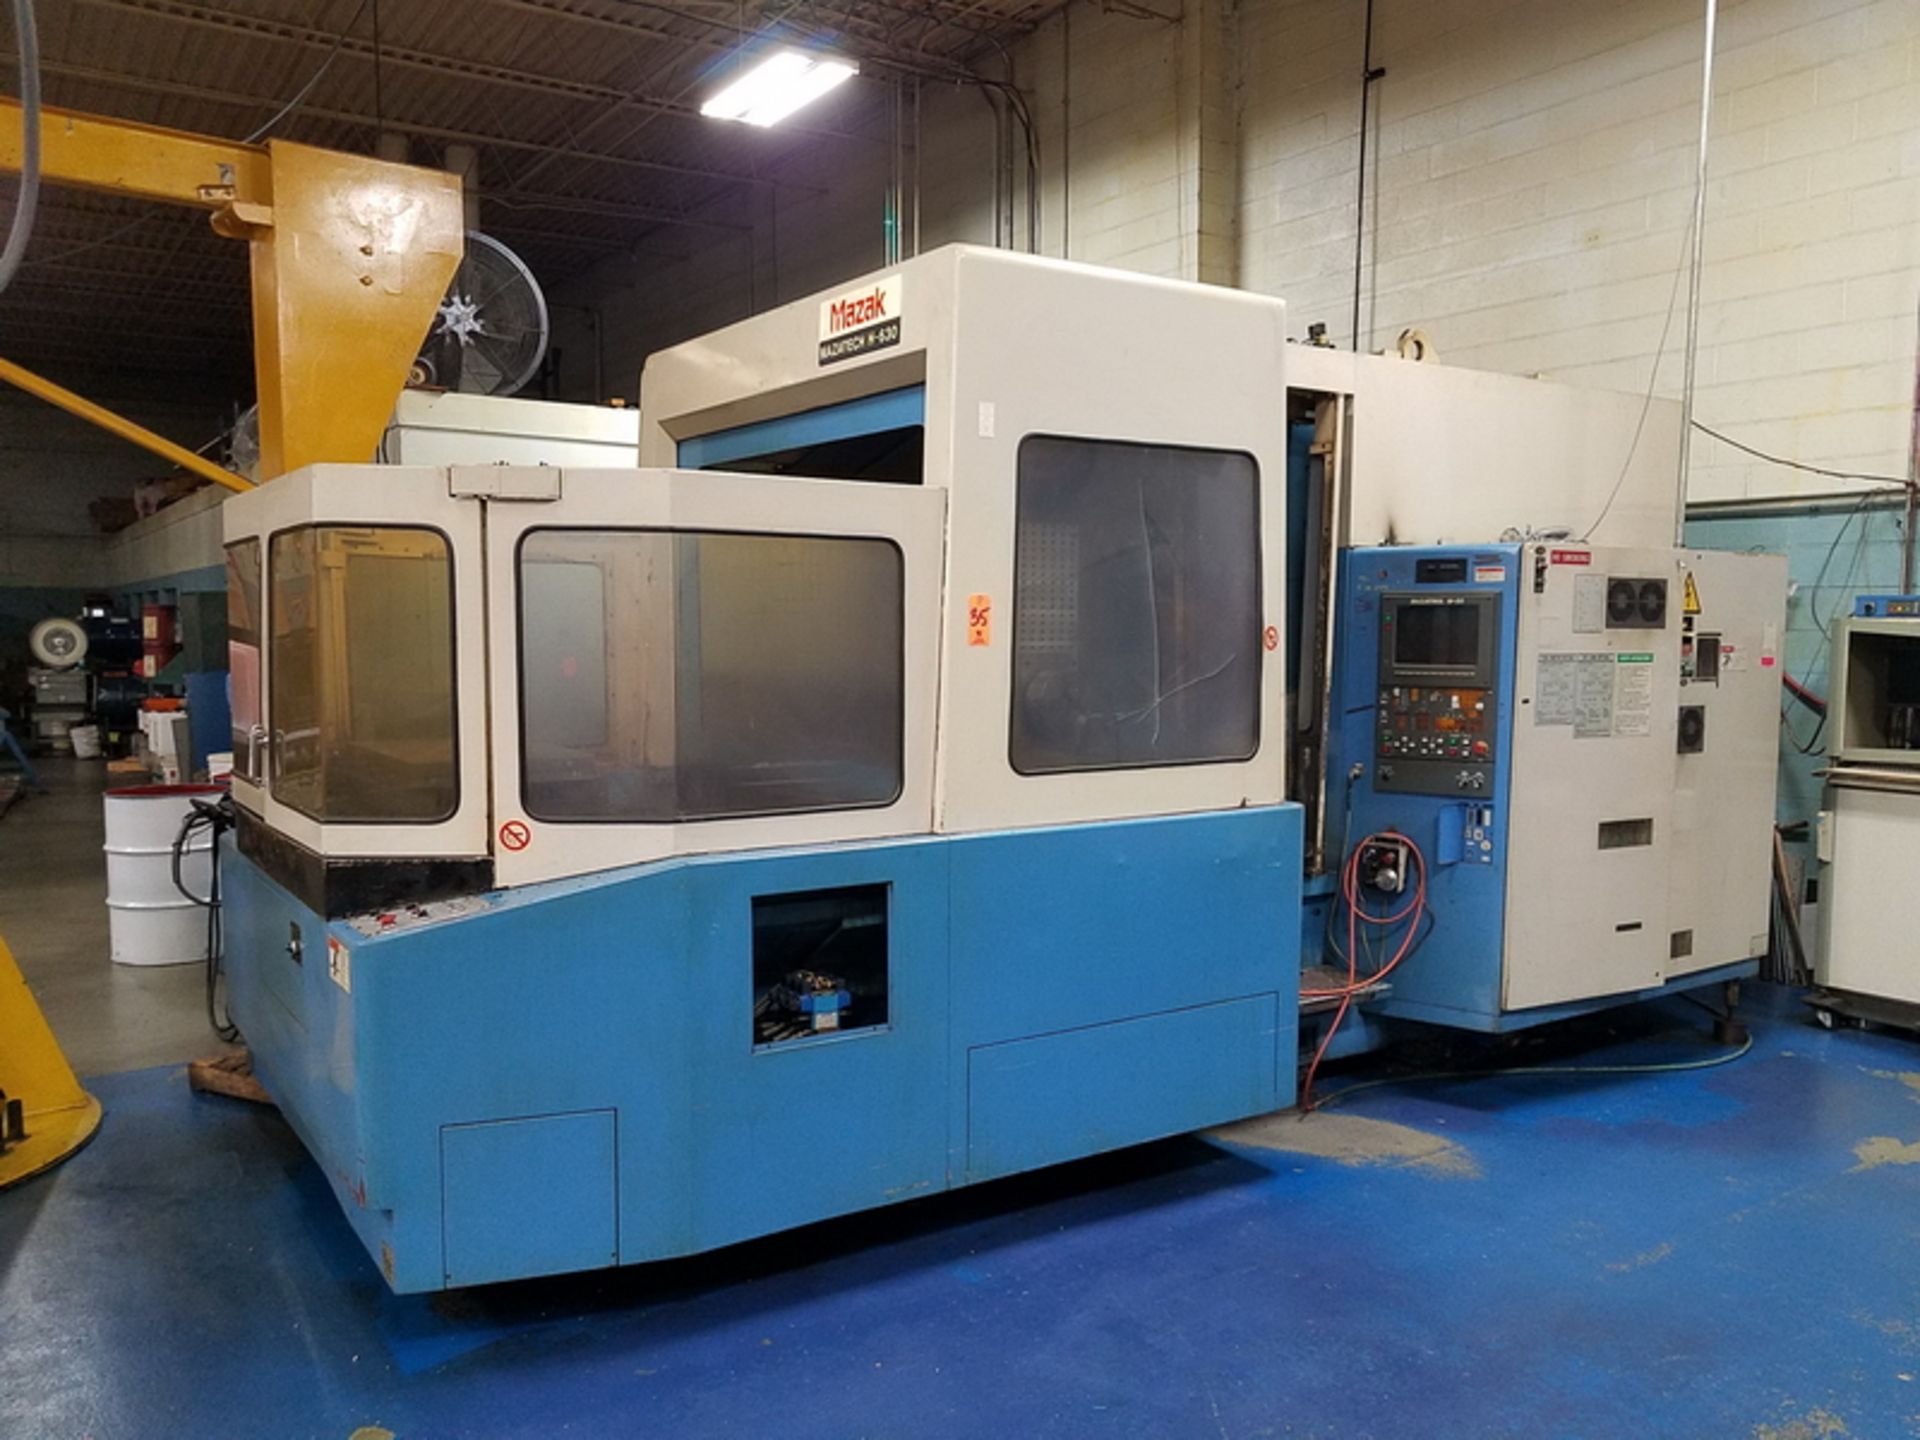 Mazak 3-Axis Model H-630 CNC Horizontal Machining Center, S/N: 78498 (1989); with 40-Position